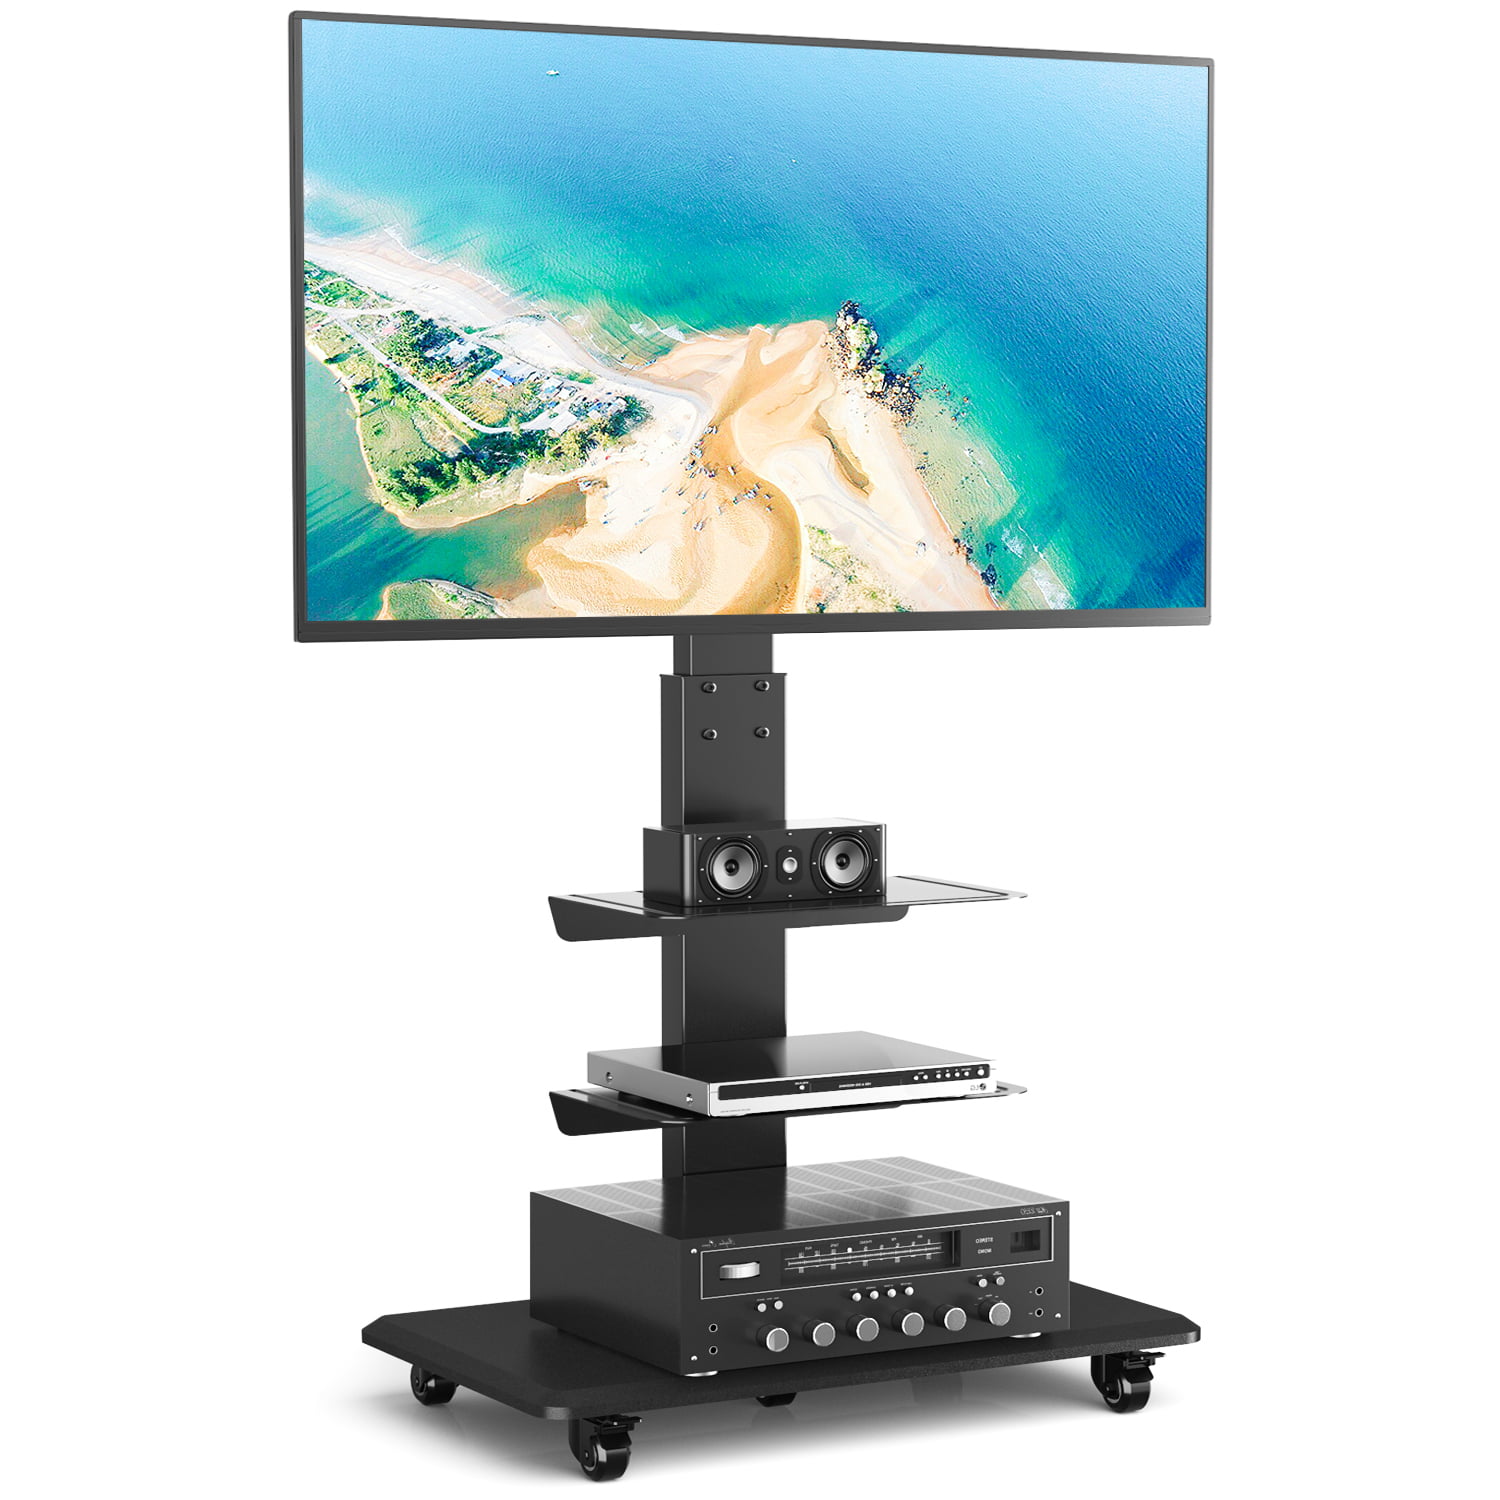 Swivel Floor TV Stand with Mount for 32 37 42 47 50 55 60 65 inch LCD LED Bj 